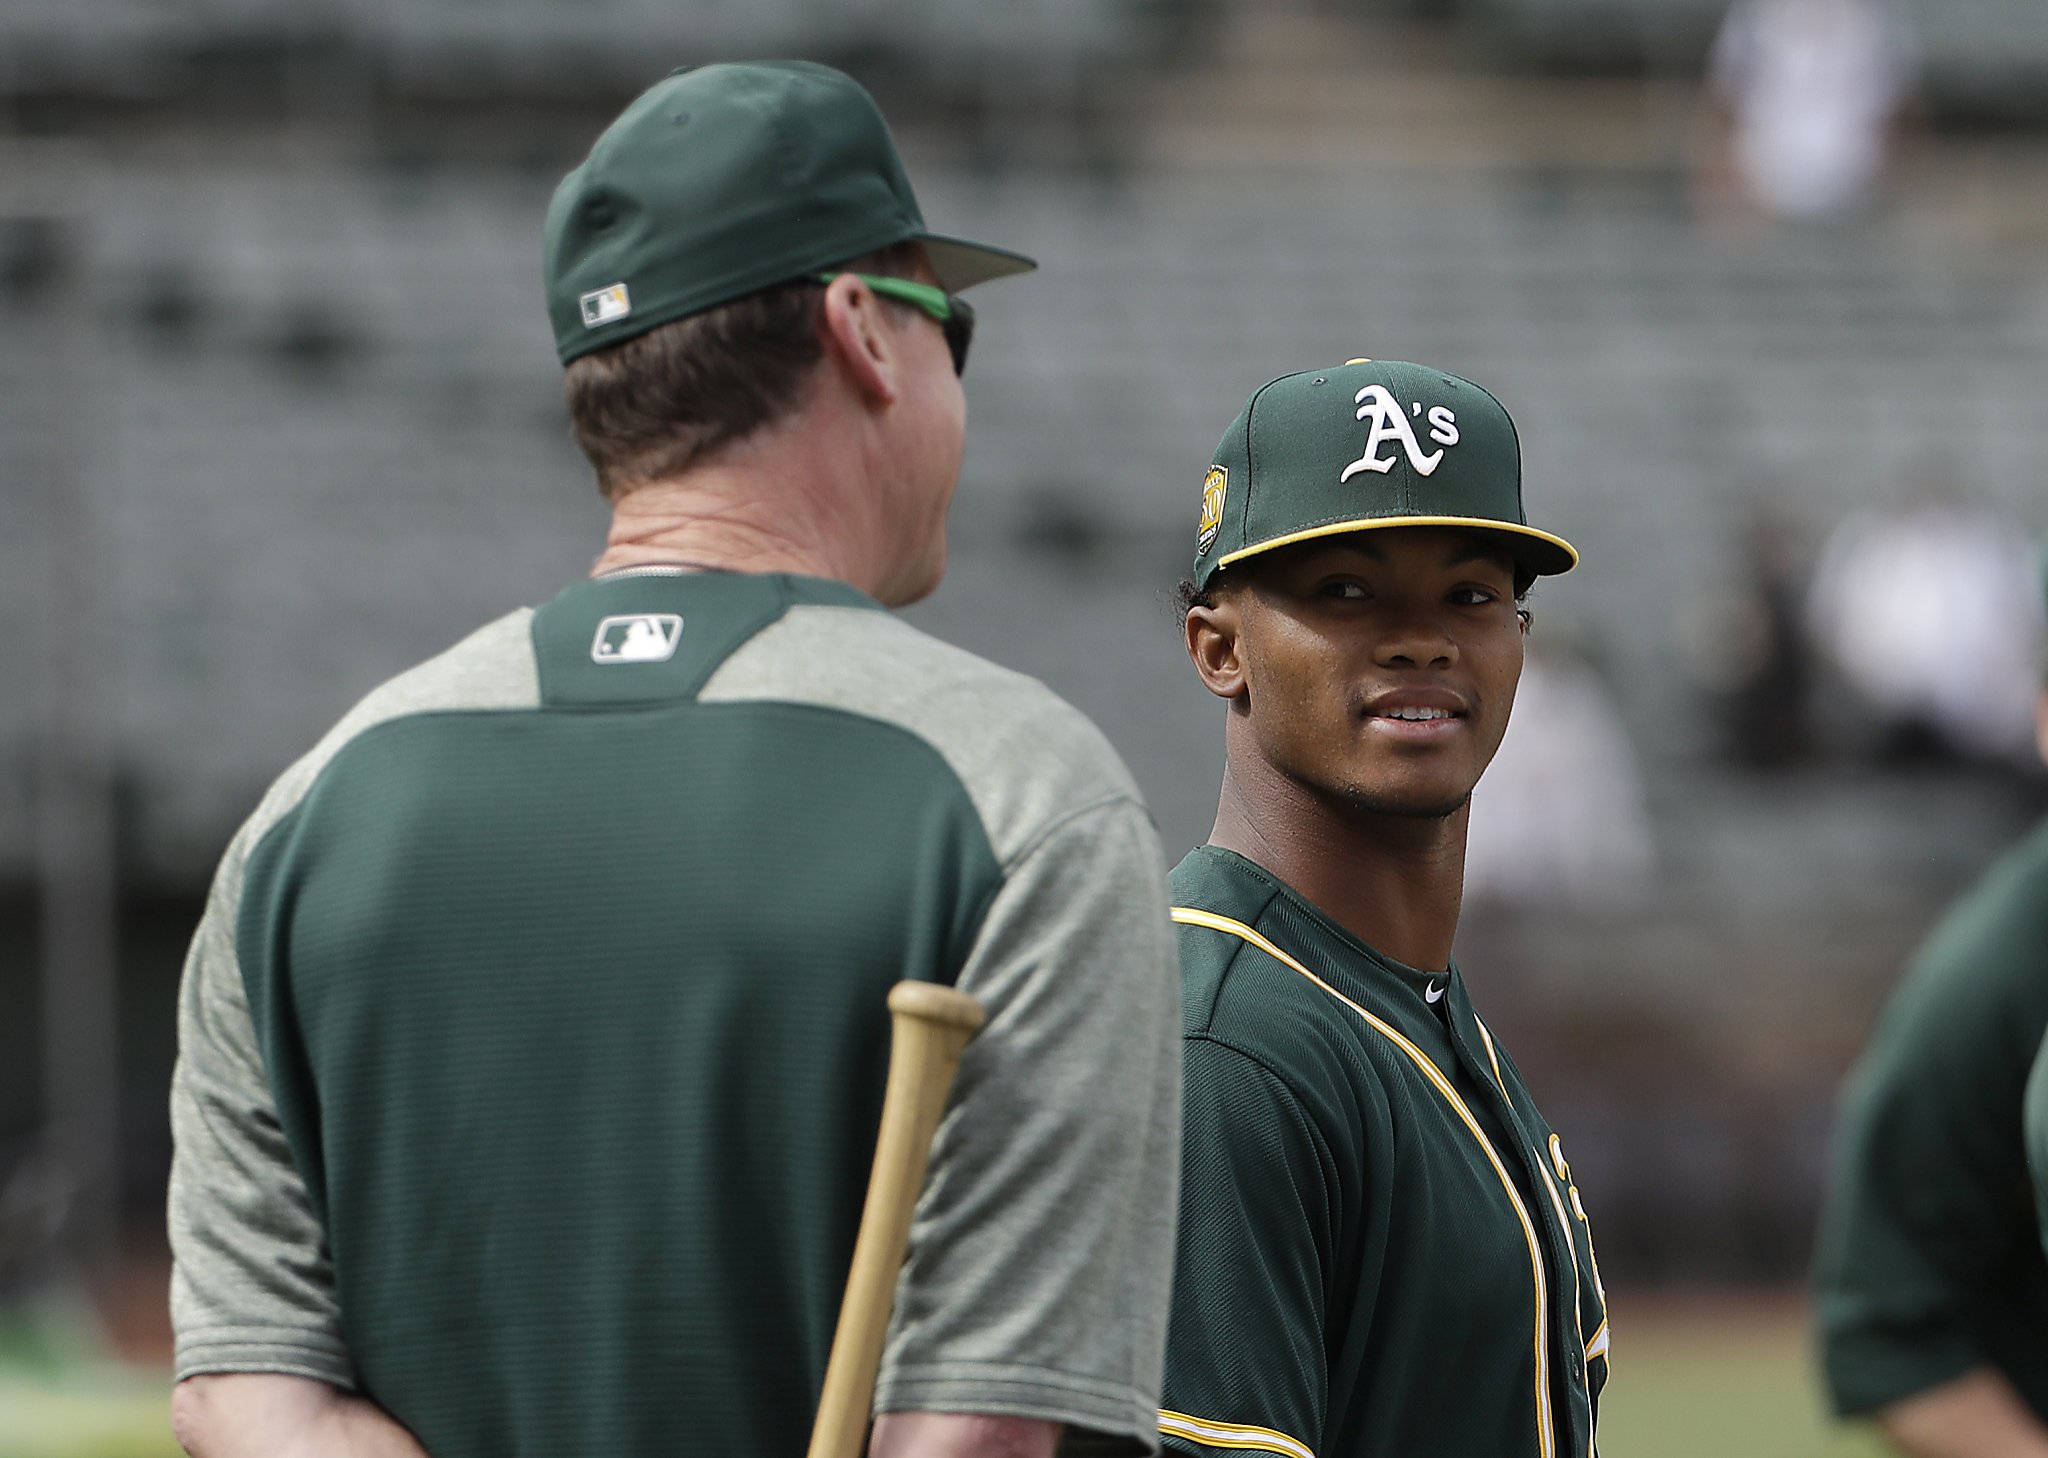 Oklahoma QB Kyler Murray signs with A's, is compared to Rickey